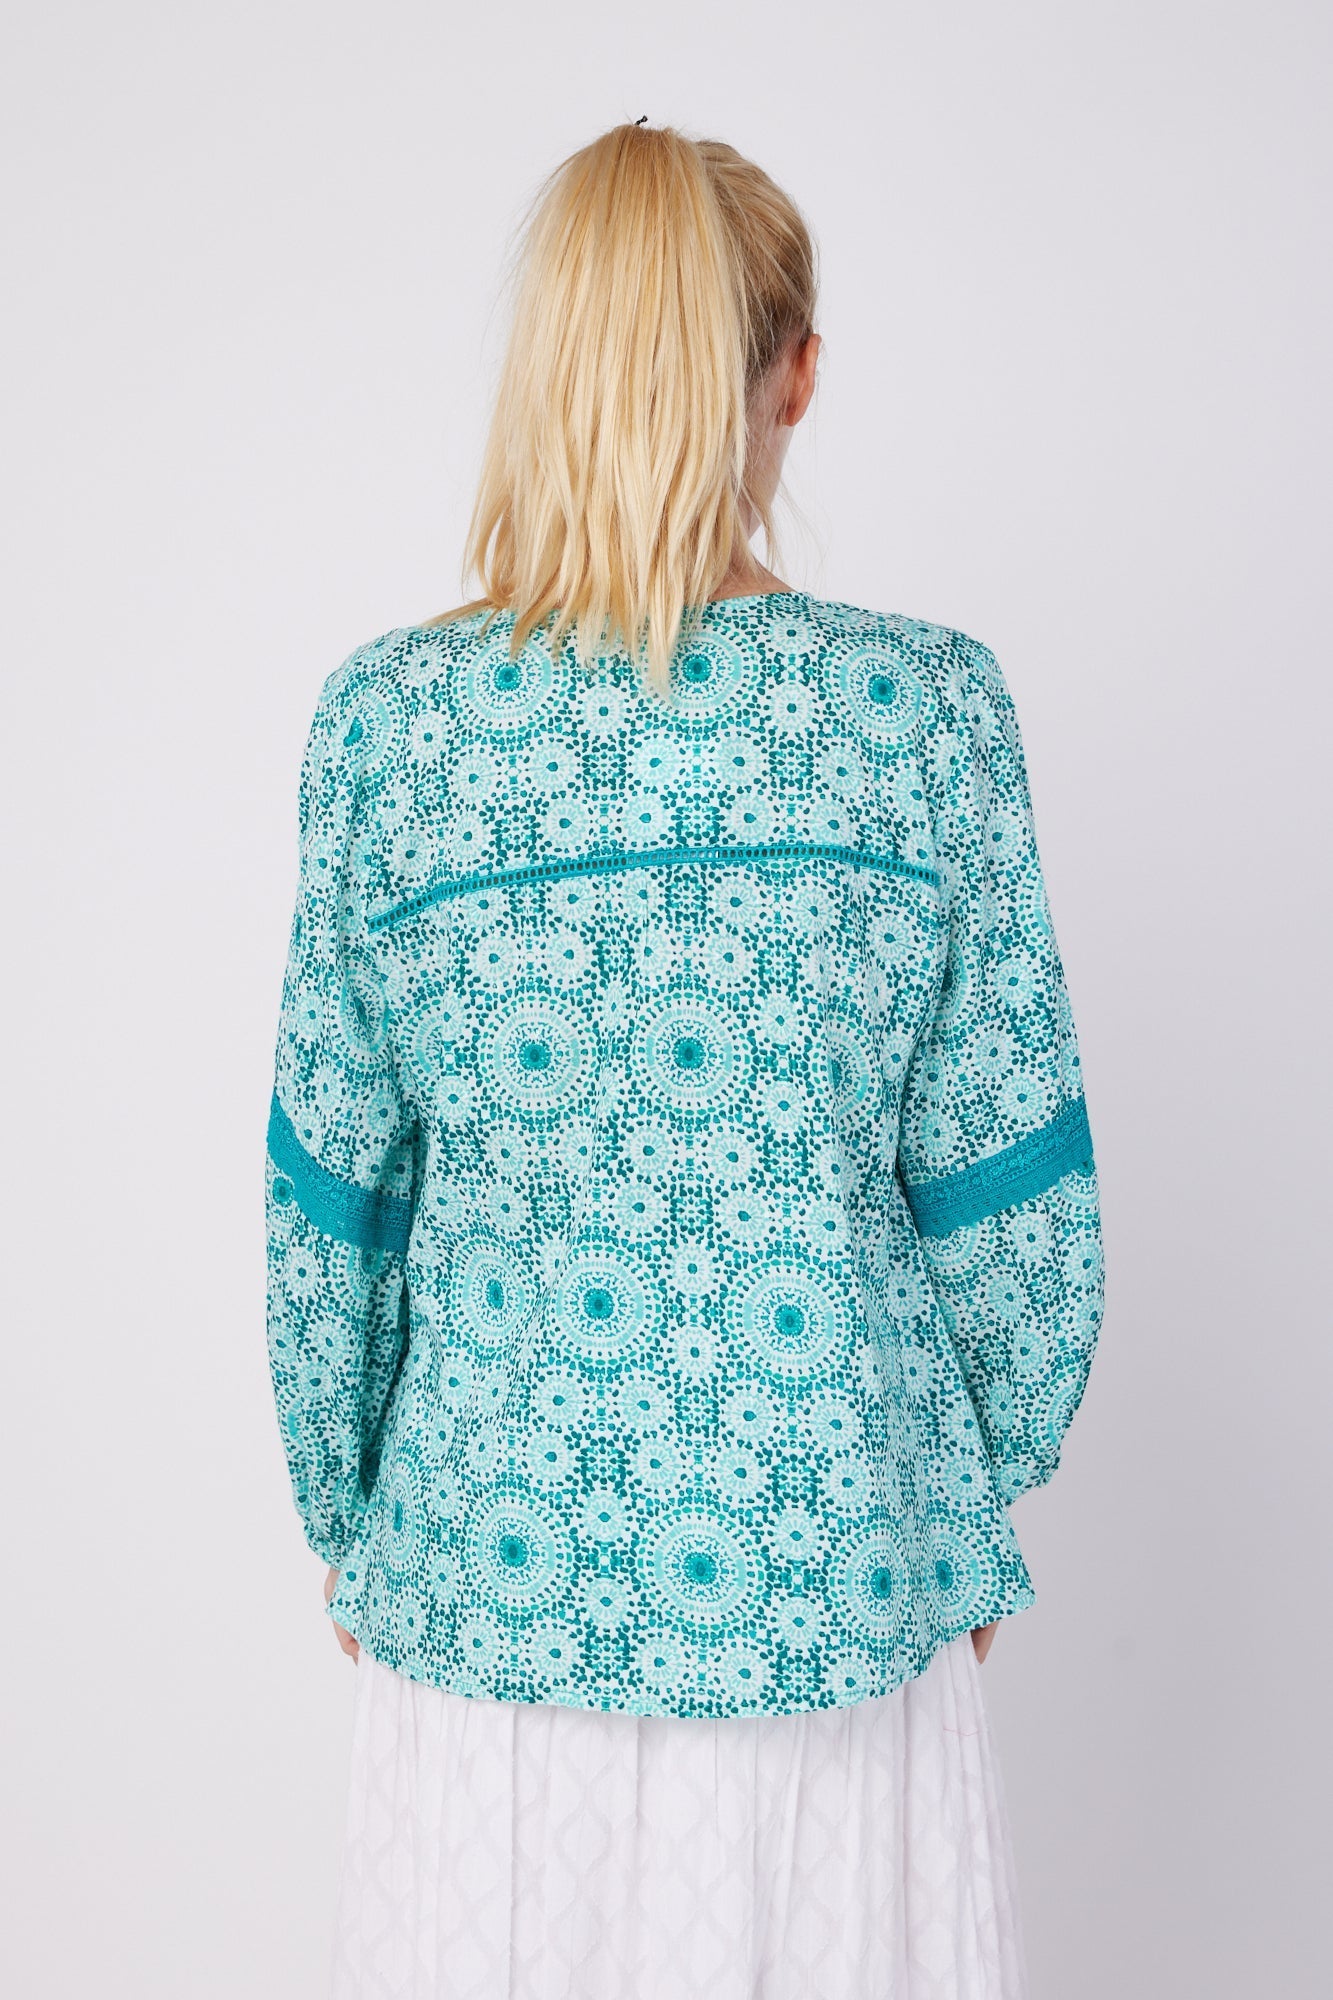 ModaPosa Leola Puff Sleeve Tassel Blouse with Lace Trim in Moroccan Tile . Discover women's resort dresses and lifestyle clothing inspired by the Mediterranean. Free worldwide shipping available!